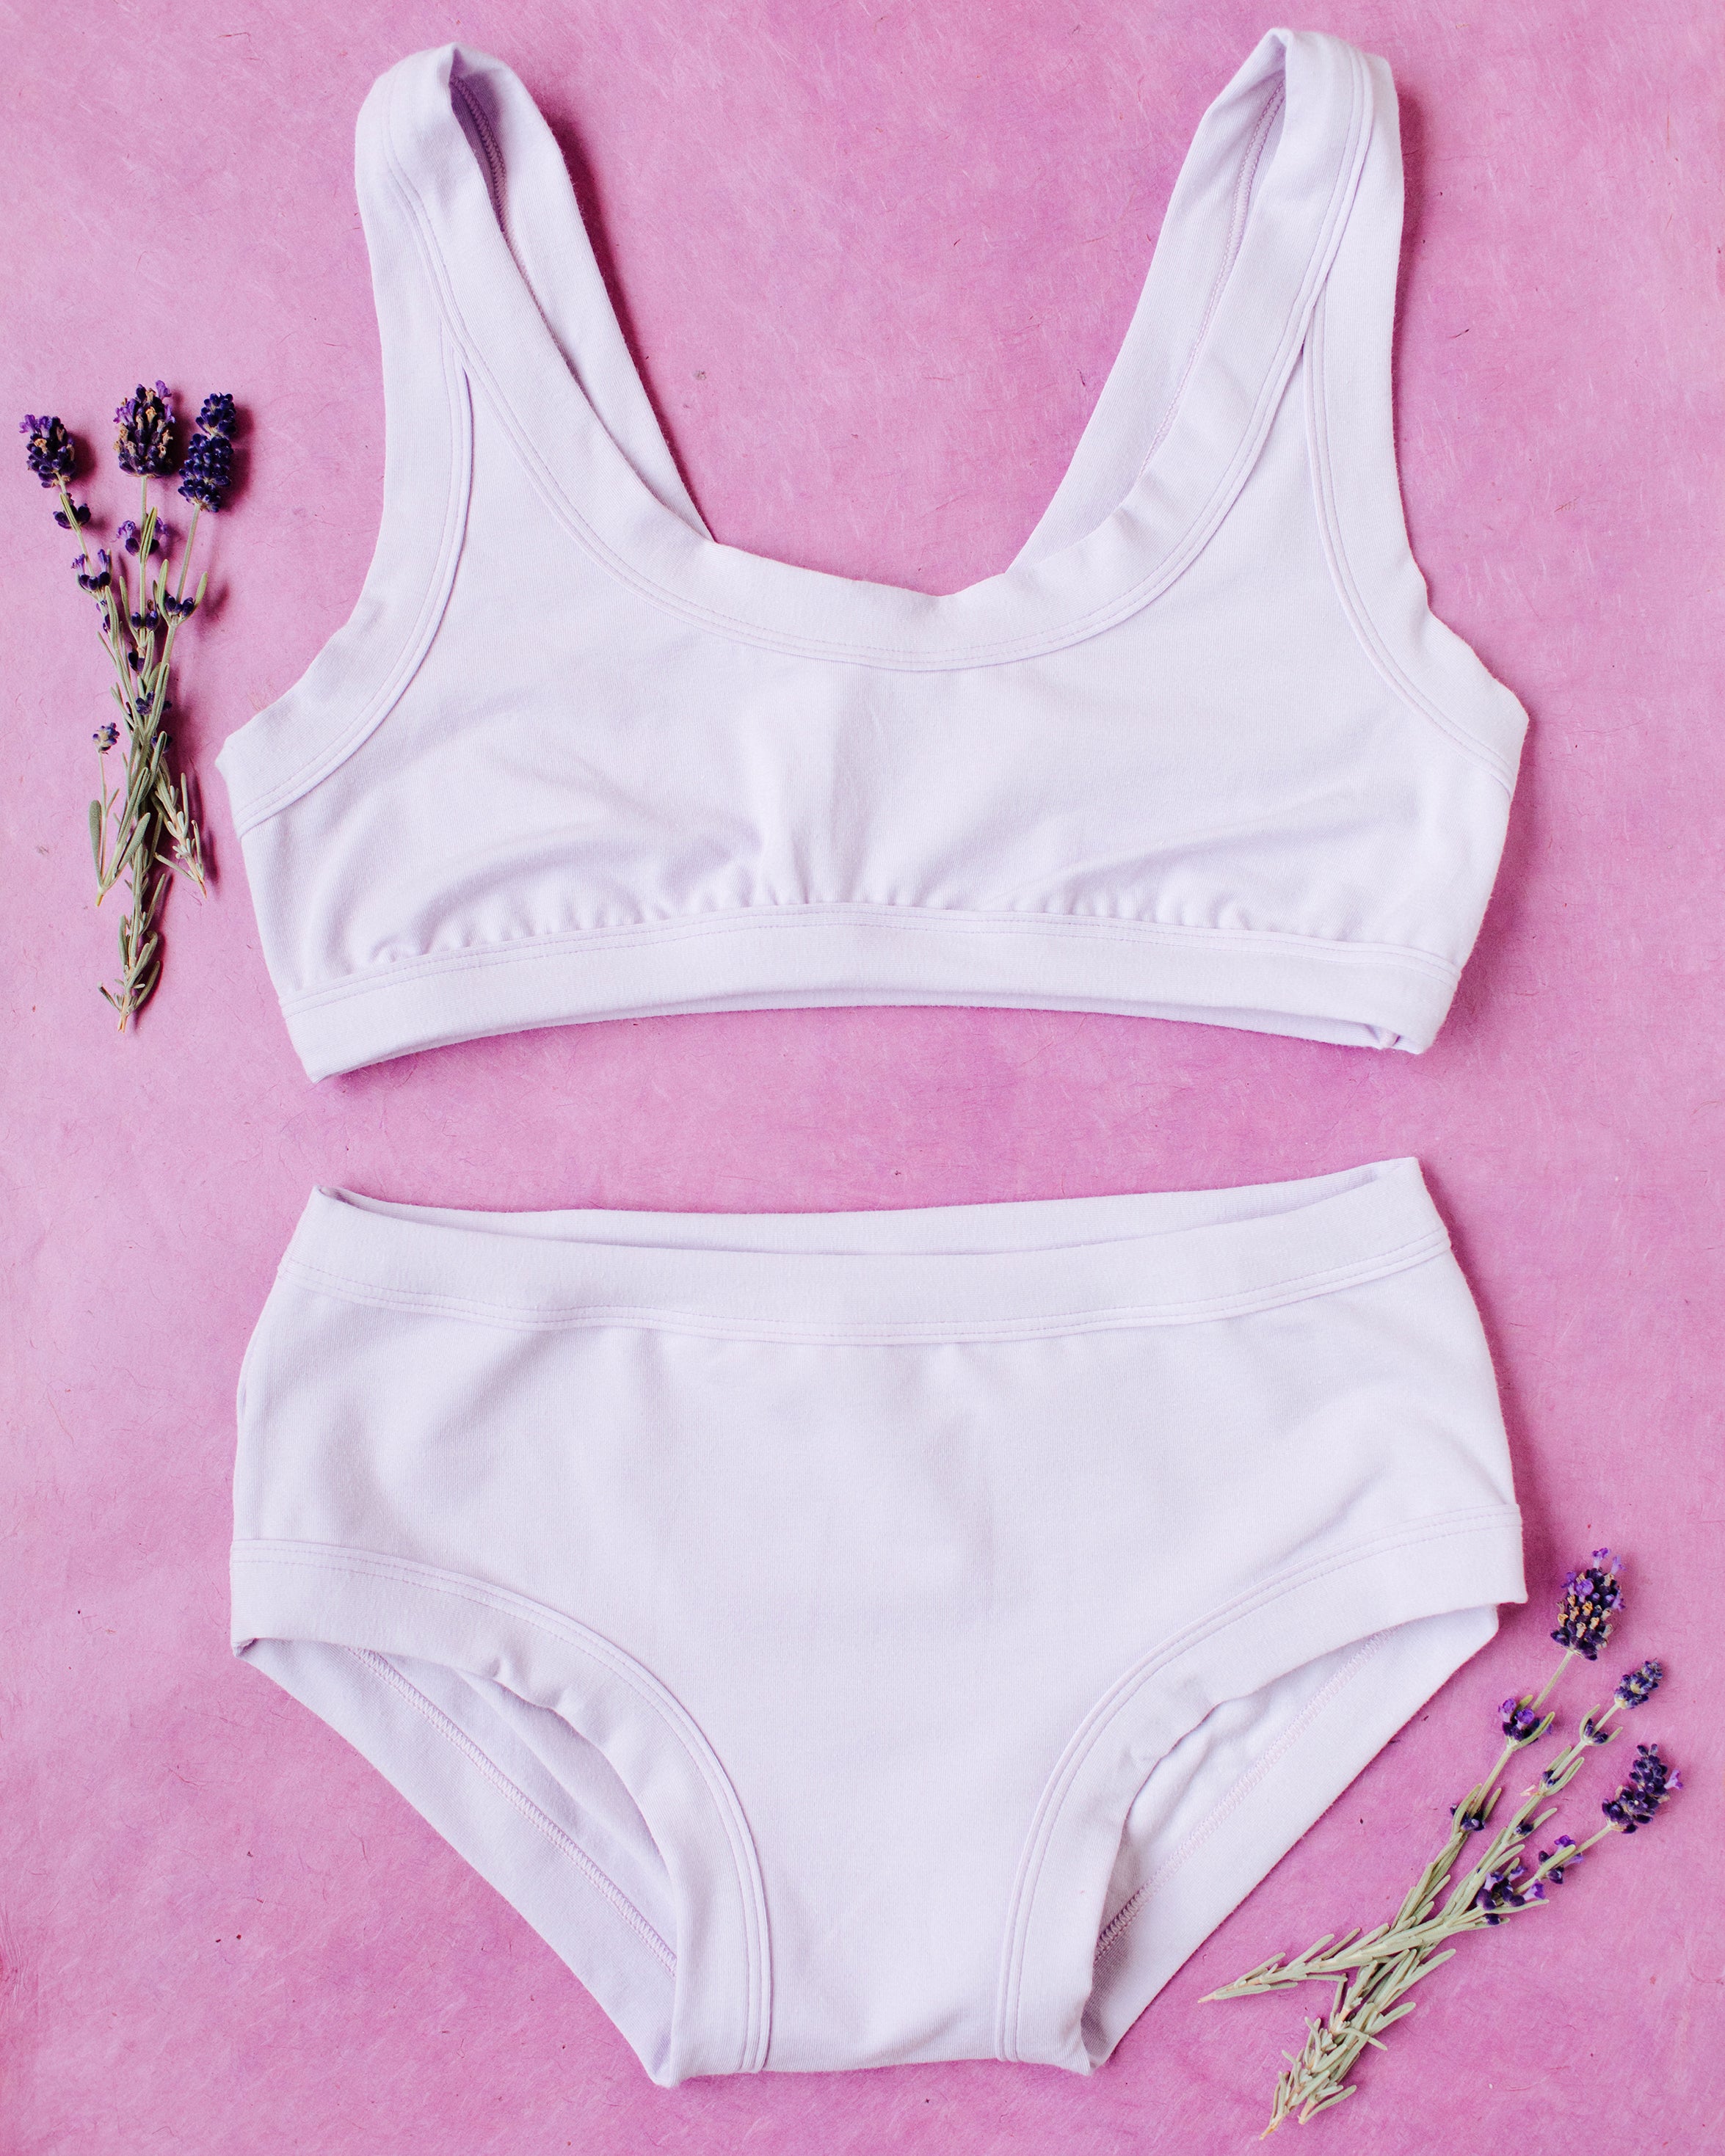 Flat lay of Light Lavender Bralette and Hipster style underwear on a purple surface with various lavender sprigs.